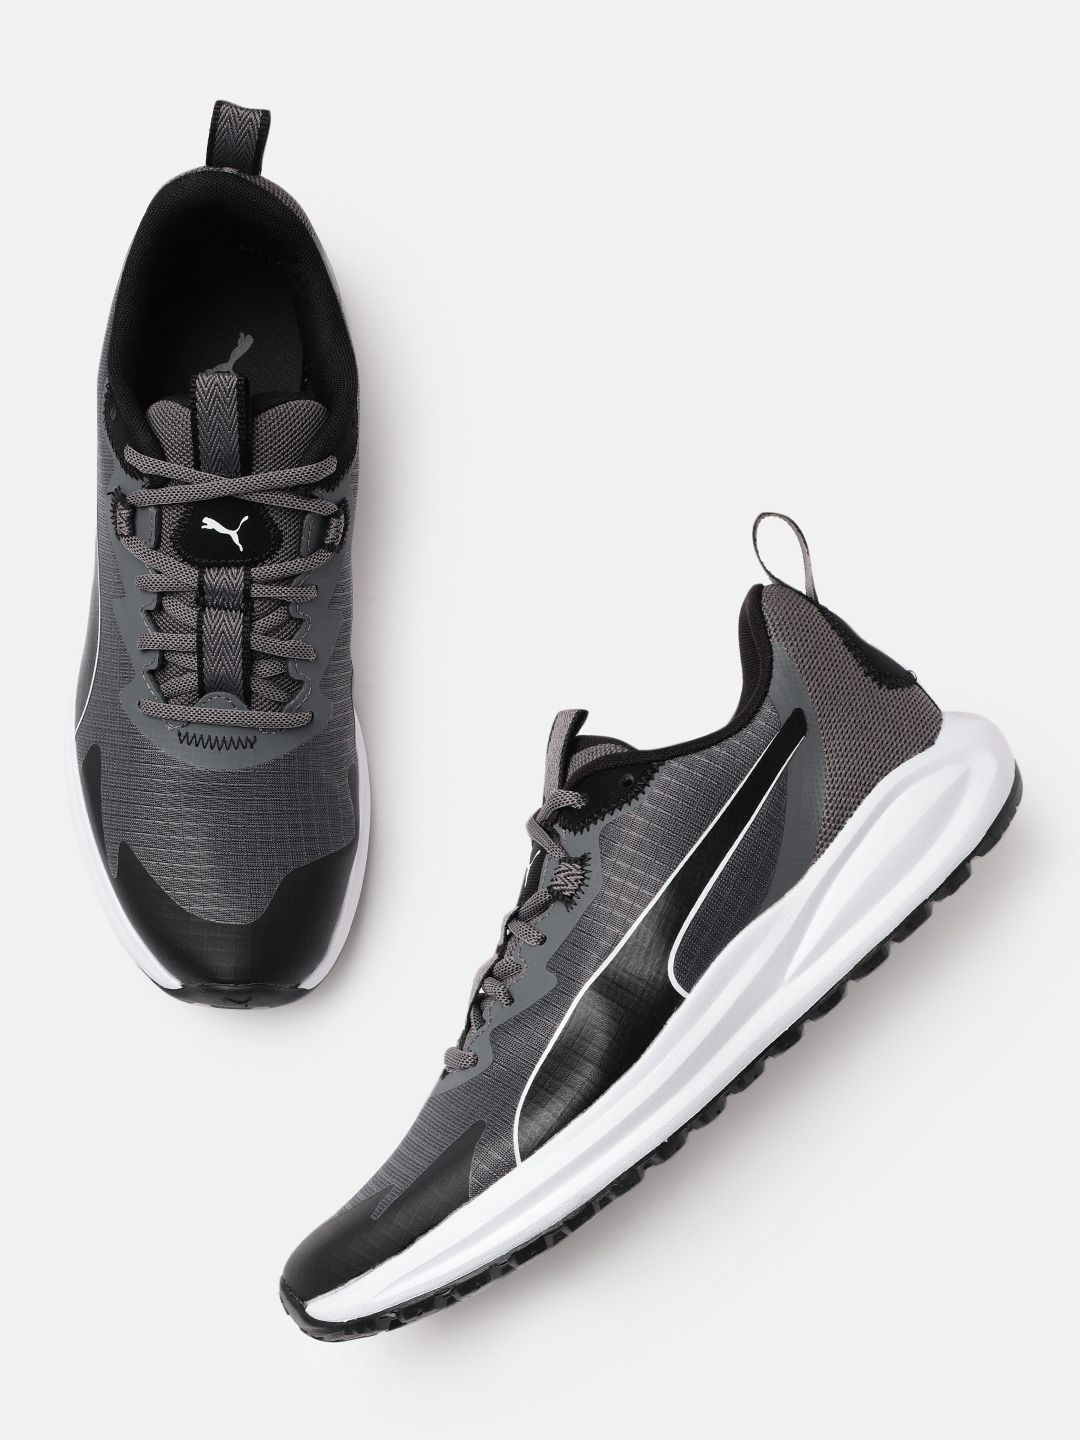 Puma Unisex Grey & Black Twitch Running Shoes Price in India